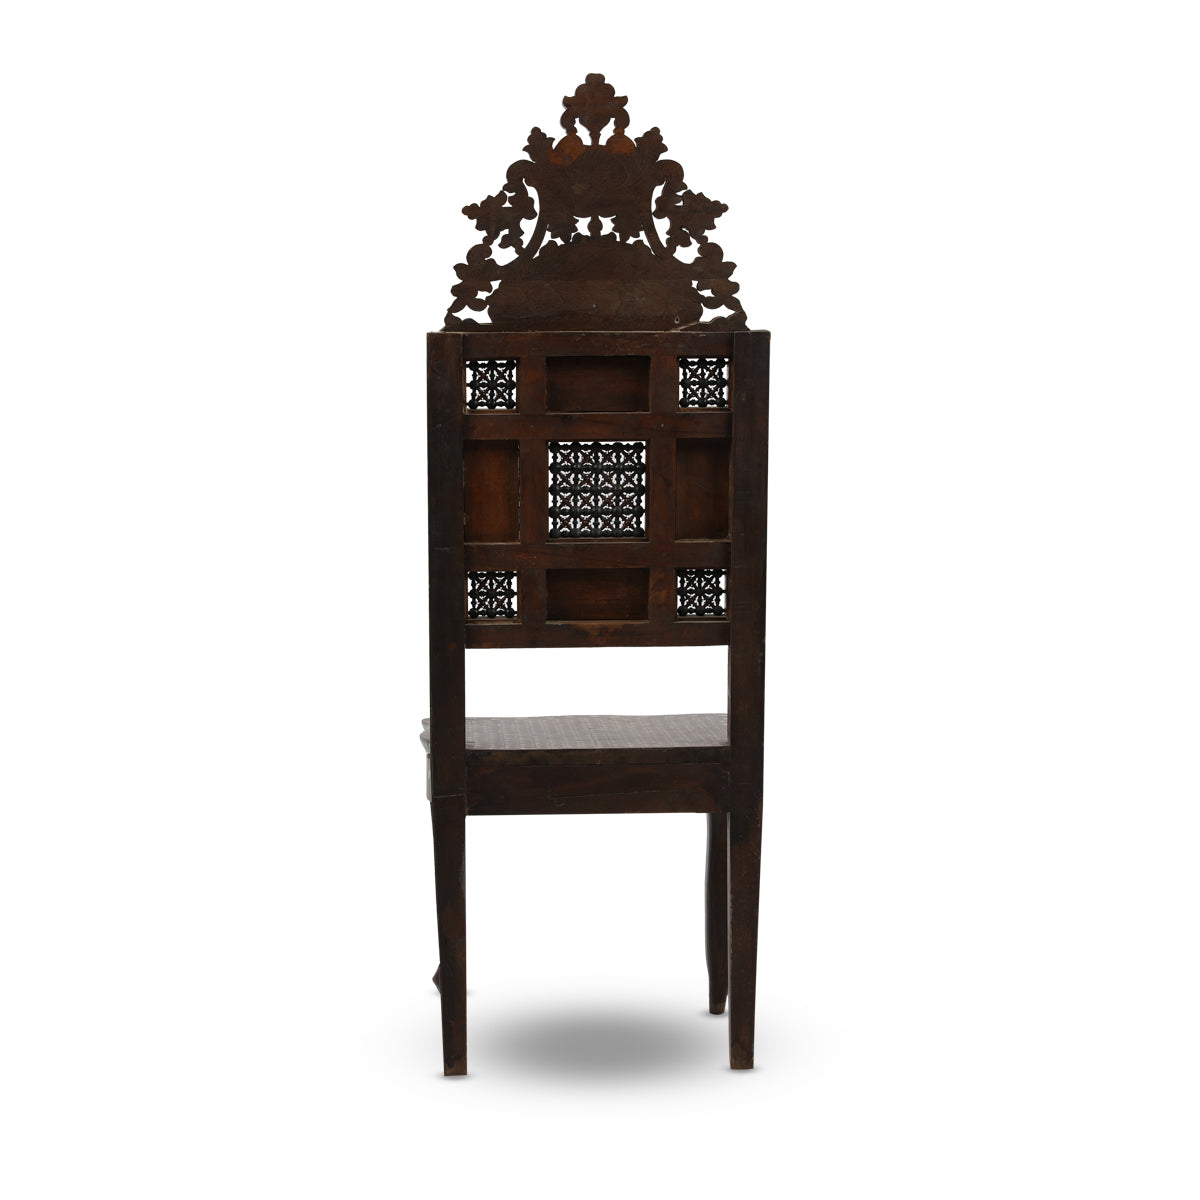 Back View of Mother of Pearl Inlaid Syrian Flat Seater Chair